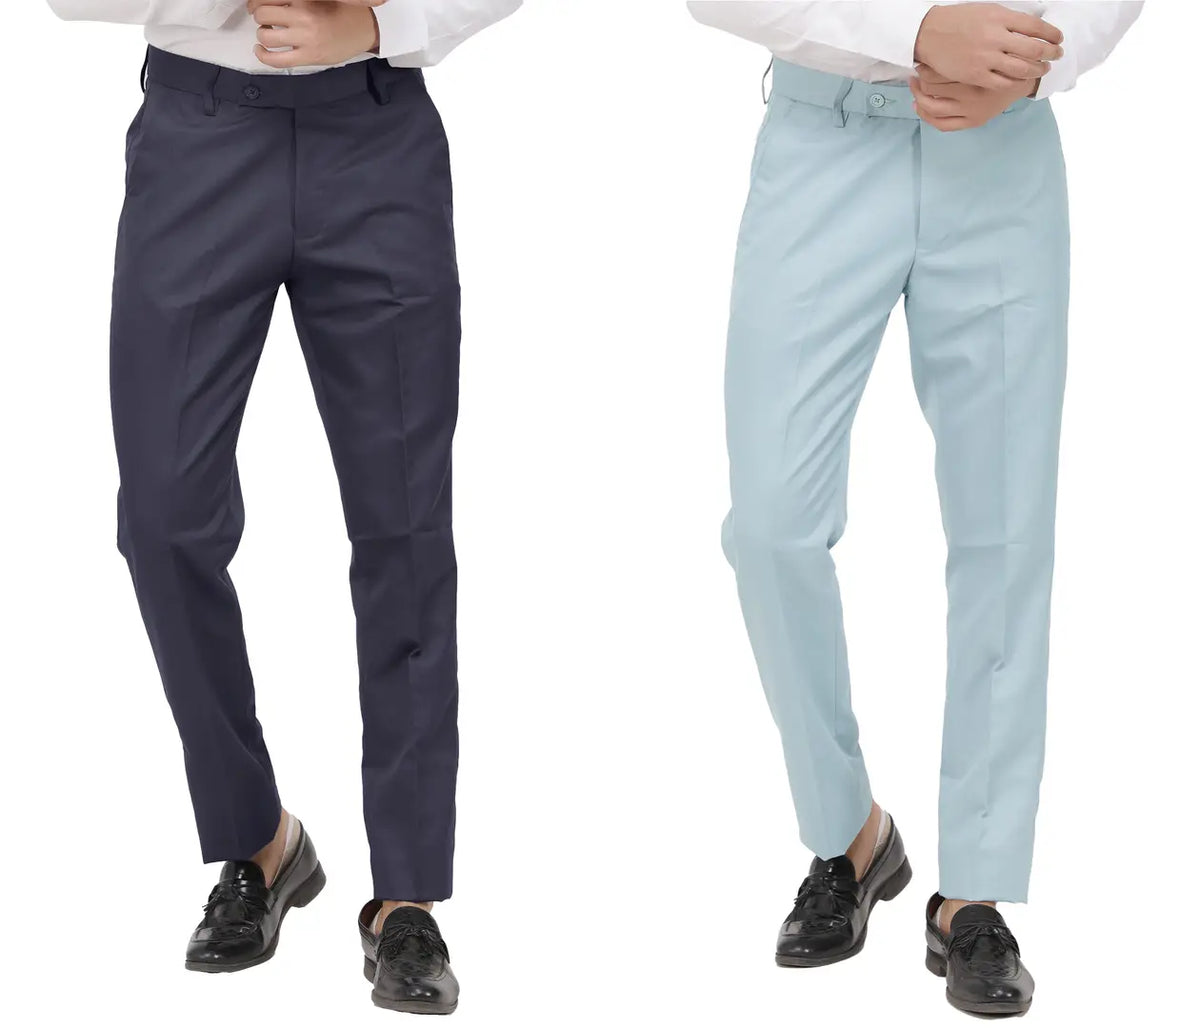 Kundan Men Poly-Viscose Blended Dark Grey and Light Sky Blue Formal Trousers ( Pack of 2 Trousers )